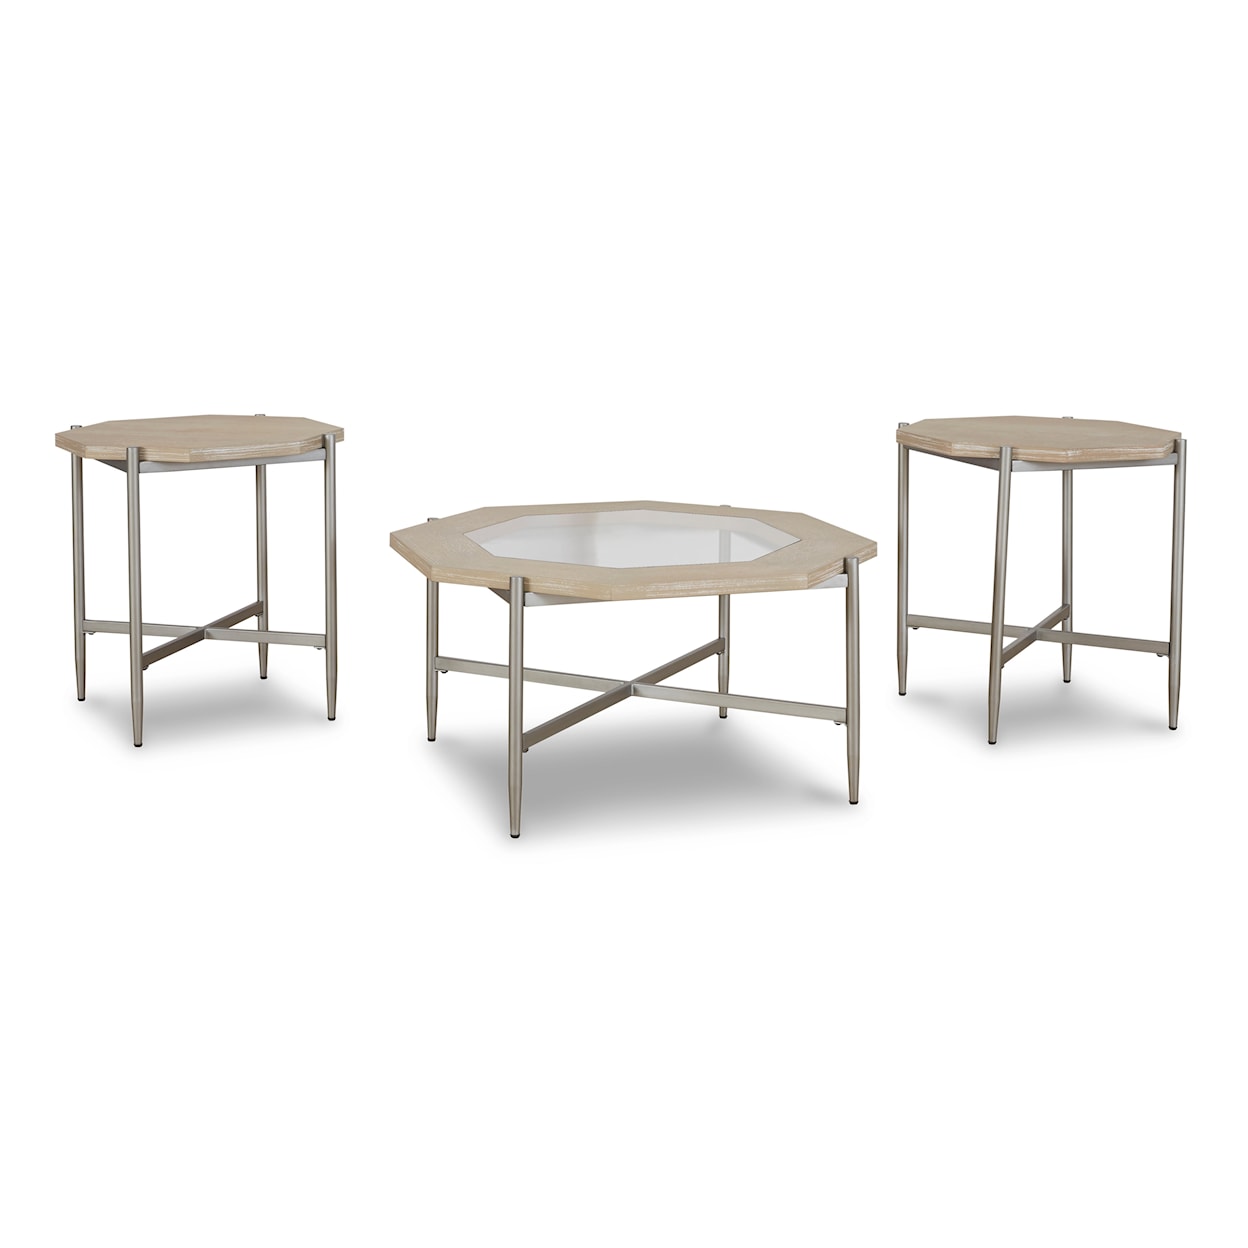 Signature Design by Ashley Varlowe 3-Piece Occasional Table Set